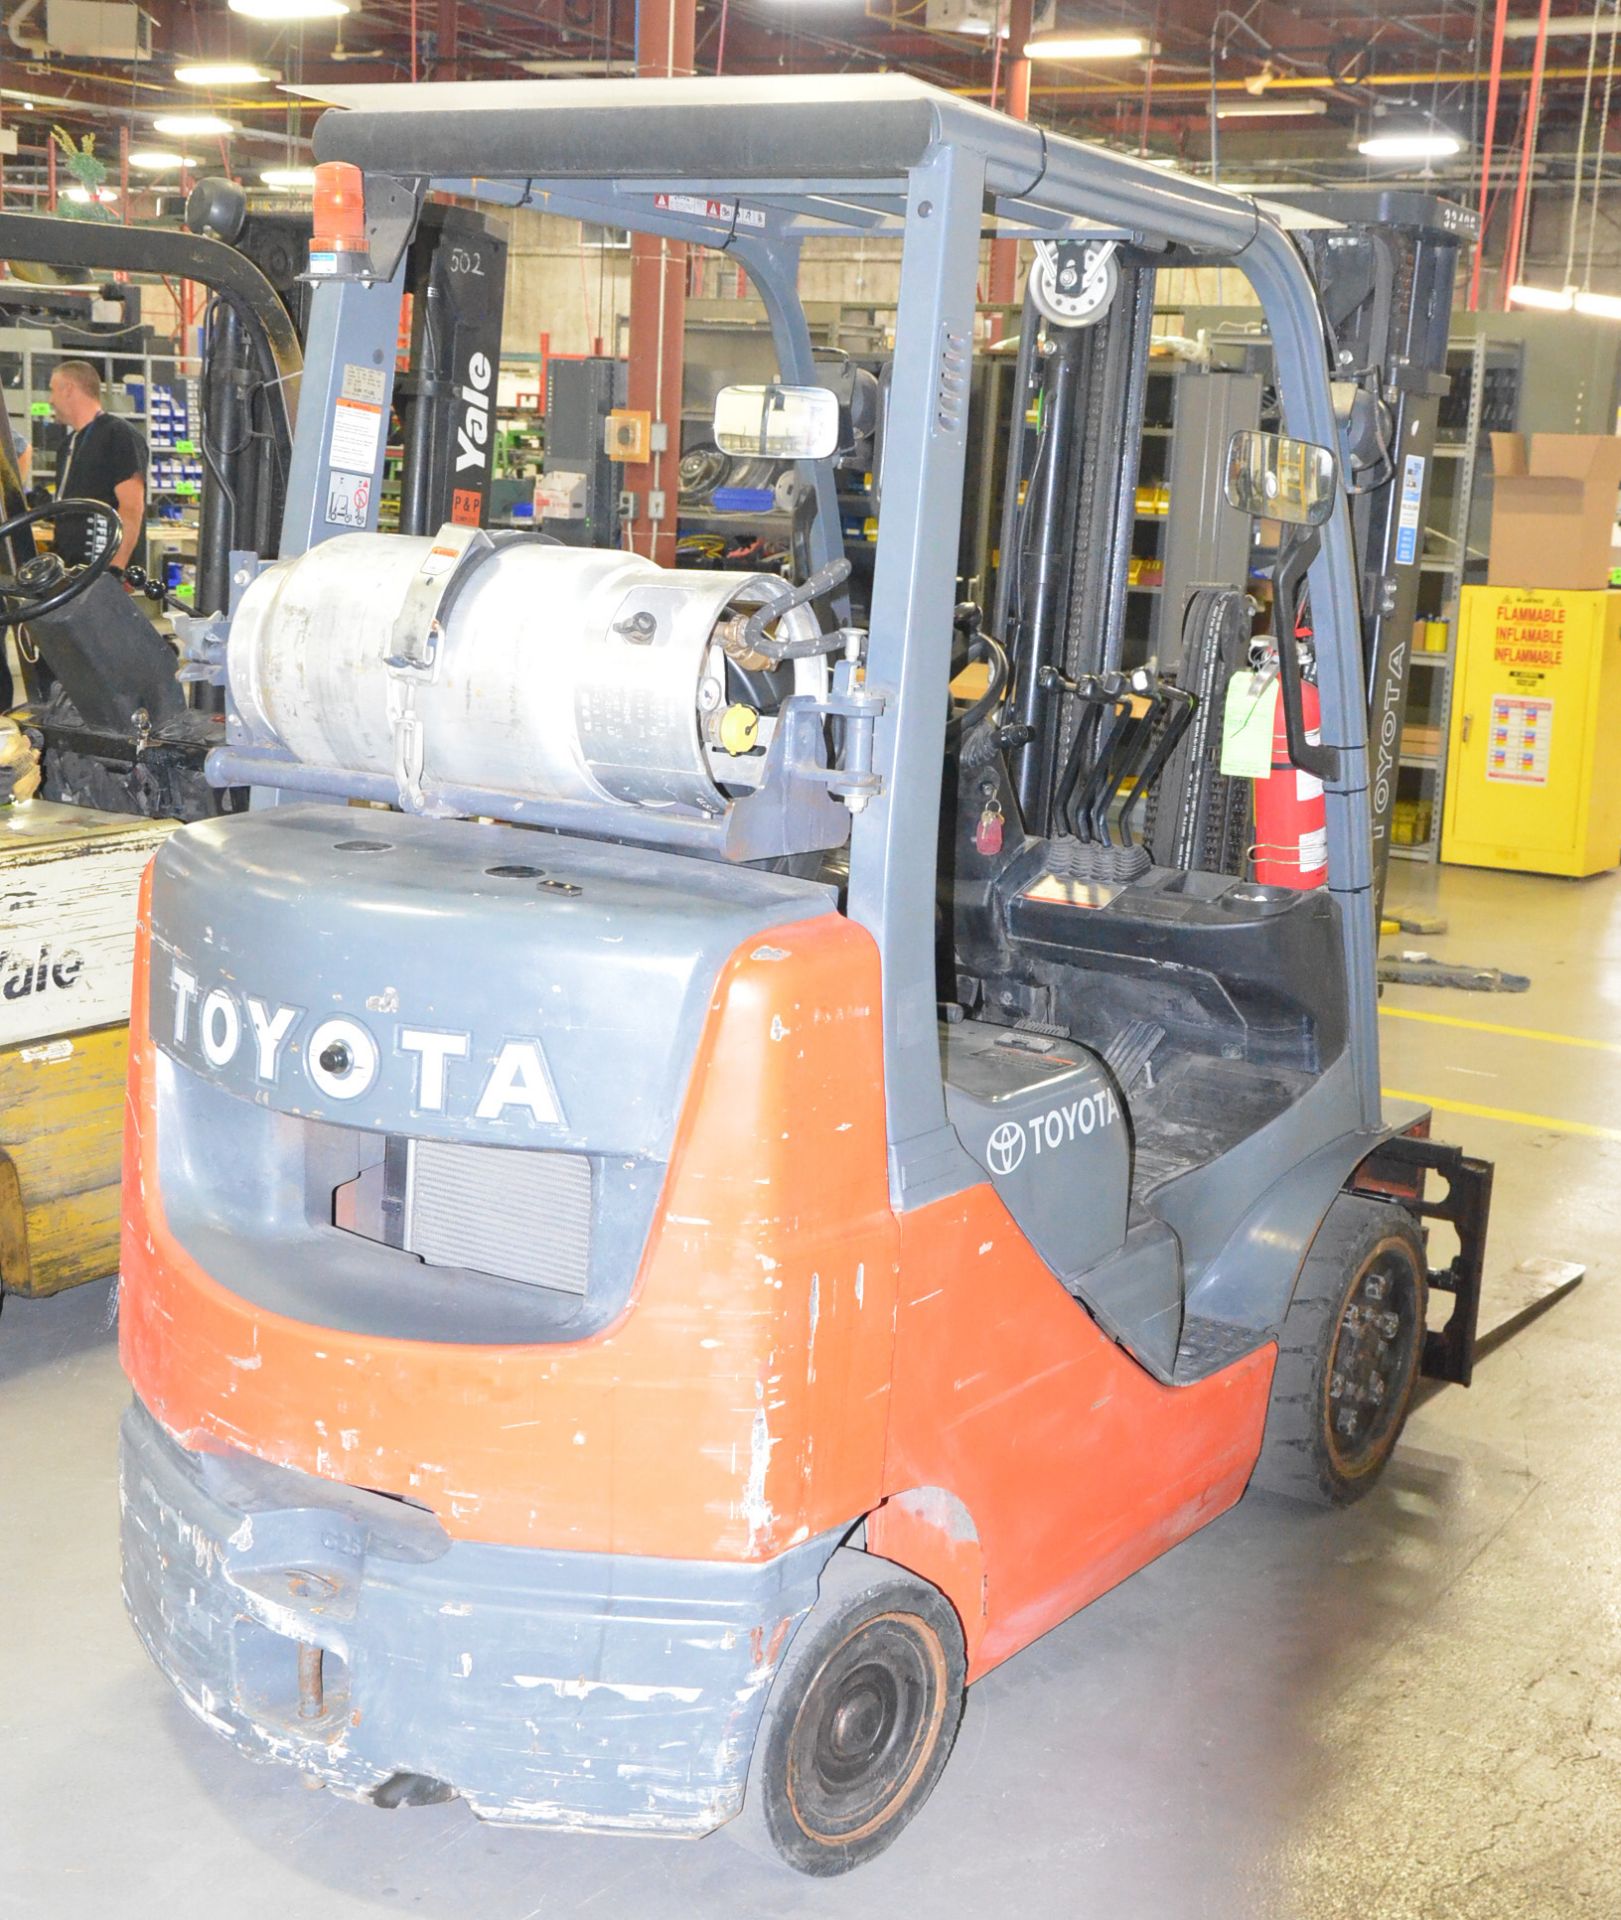 TOYOTA (2013) 8FGCU25 LPG FORKLIFT WITH 4800 LB. CAPACITY, 189" VERTICAL LIFT, 3 STAGE MAST, SOLID - Image 3 of 6